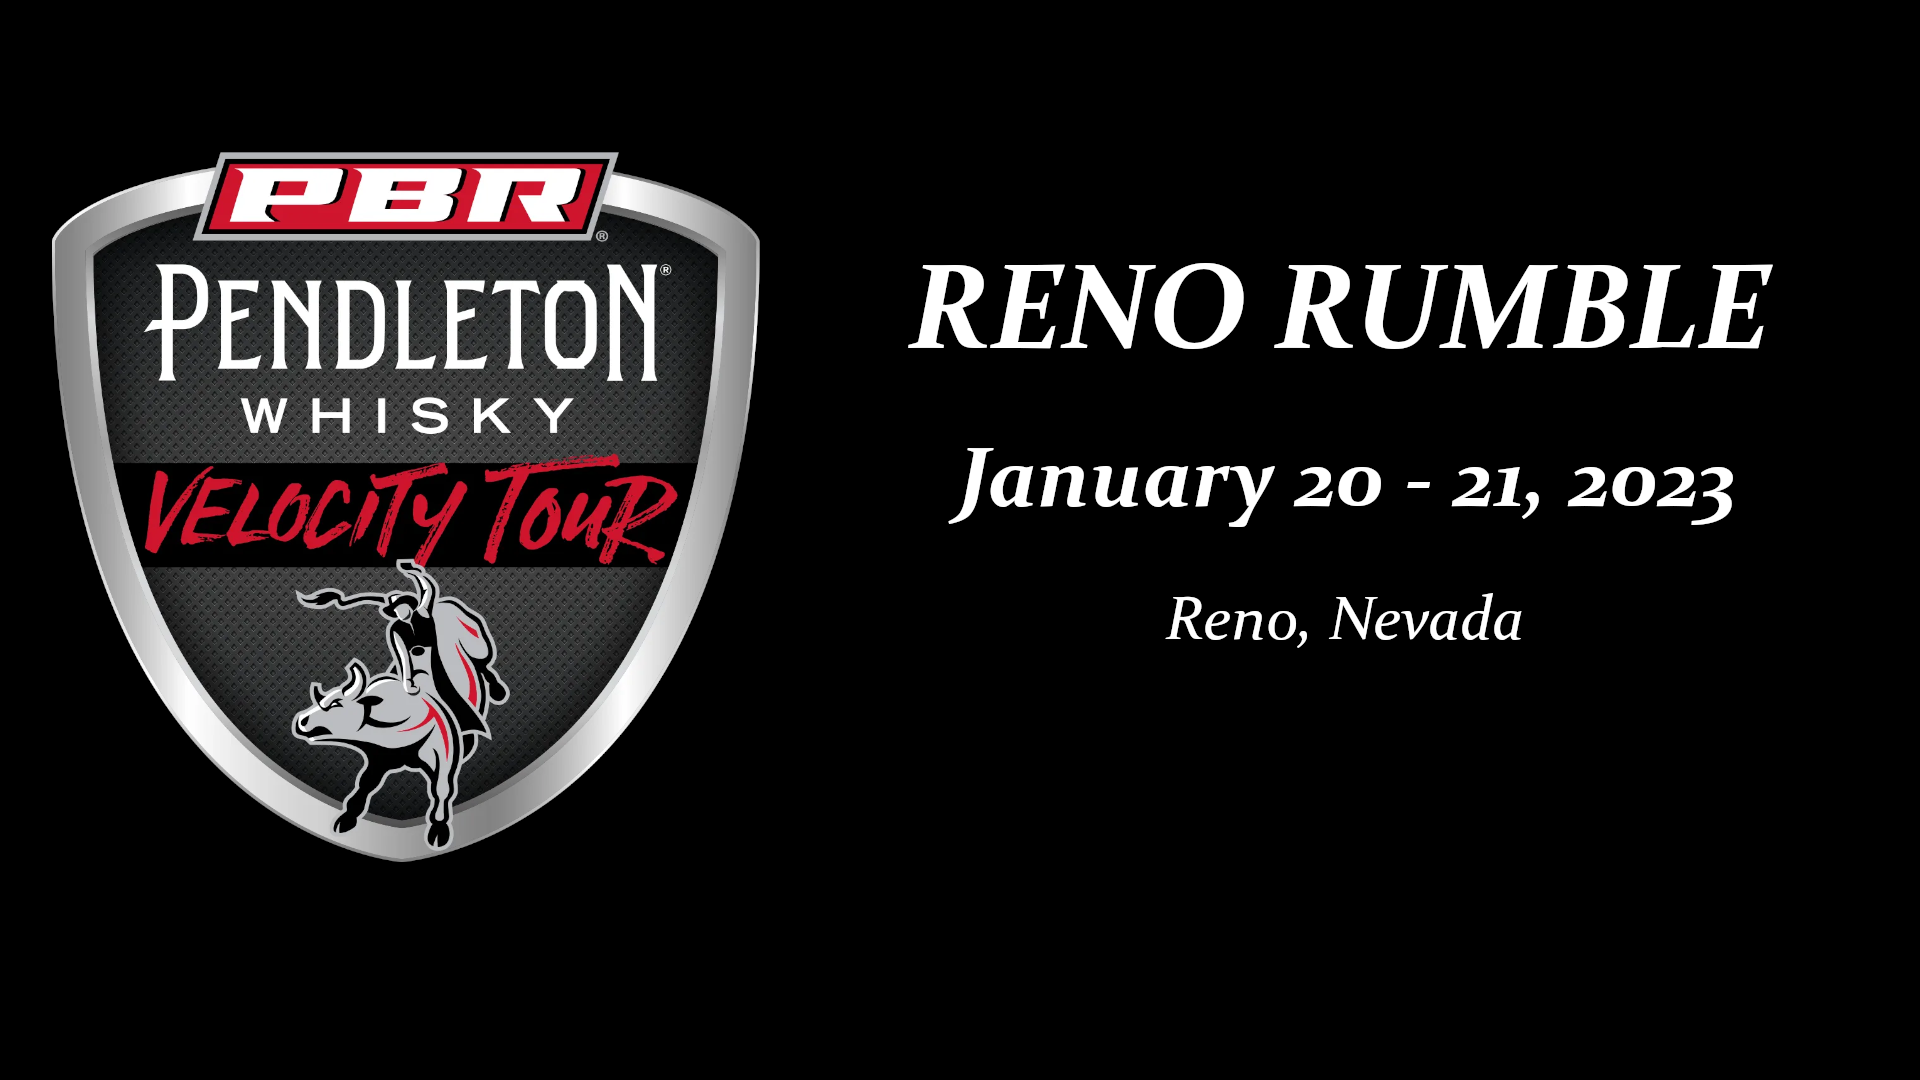 Watch the PBR Velocity Tour Reno Rumble Live